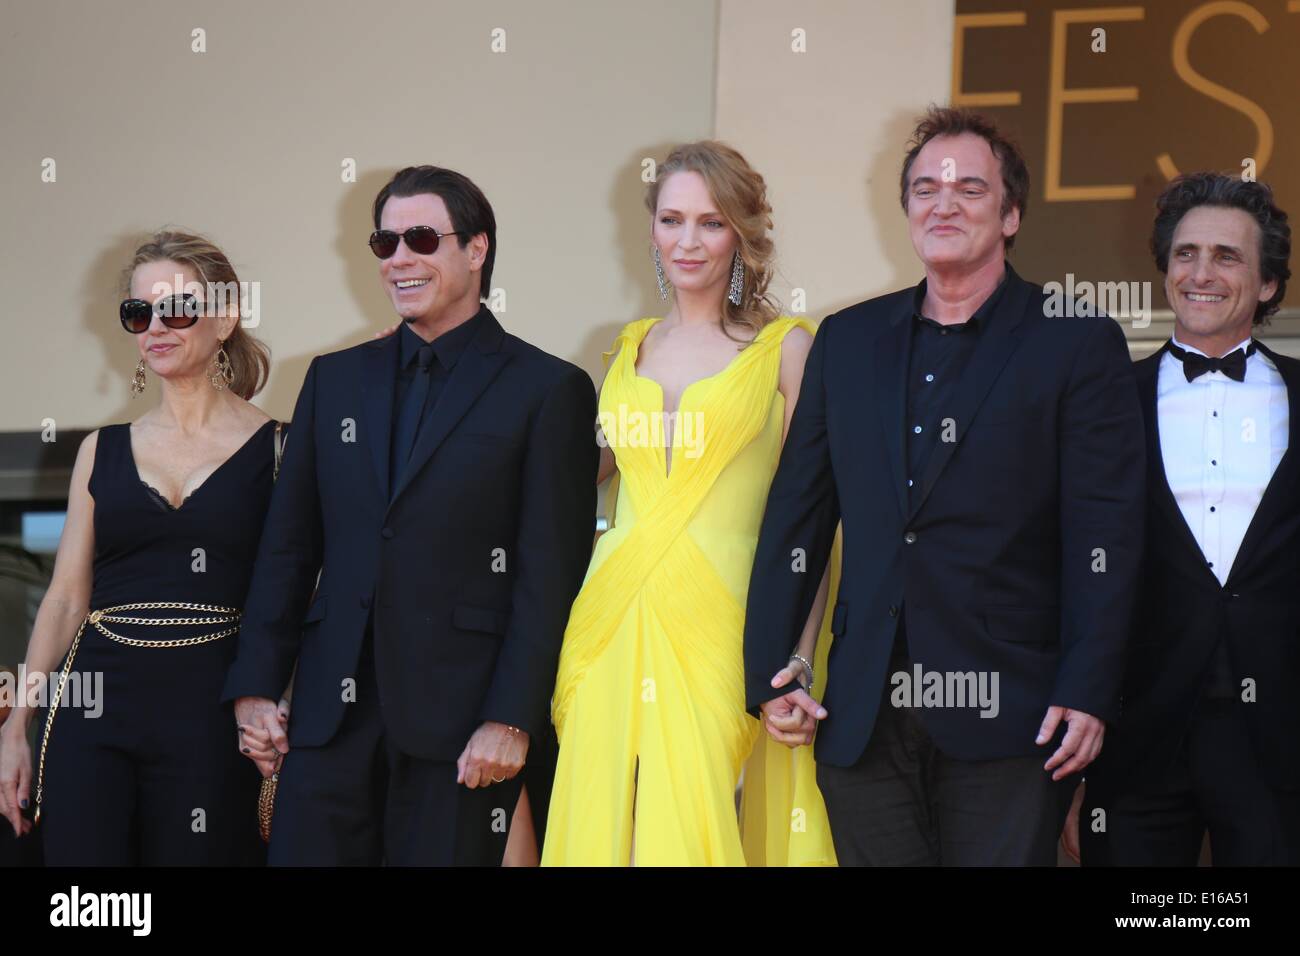 Cannes, France. 23rd May, 2014. US actors Kelly Preston (L-R), John Travolta, Uma Thurman, US director Quentin Tarantino and US producer Lawrence Bender attend the premiere of 'Sils Maria' during the 67th Cannes International Film Festival at Palais des Festivals in Cannes, France, on 23 May 2014. Photo: Hubert Boesl-NO WIRE SERVICE- Credit:  dpa picture alliance/Alamy Live News Stock Photo